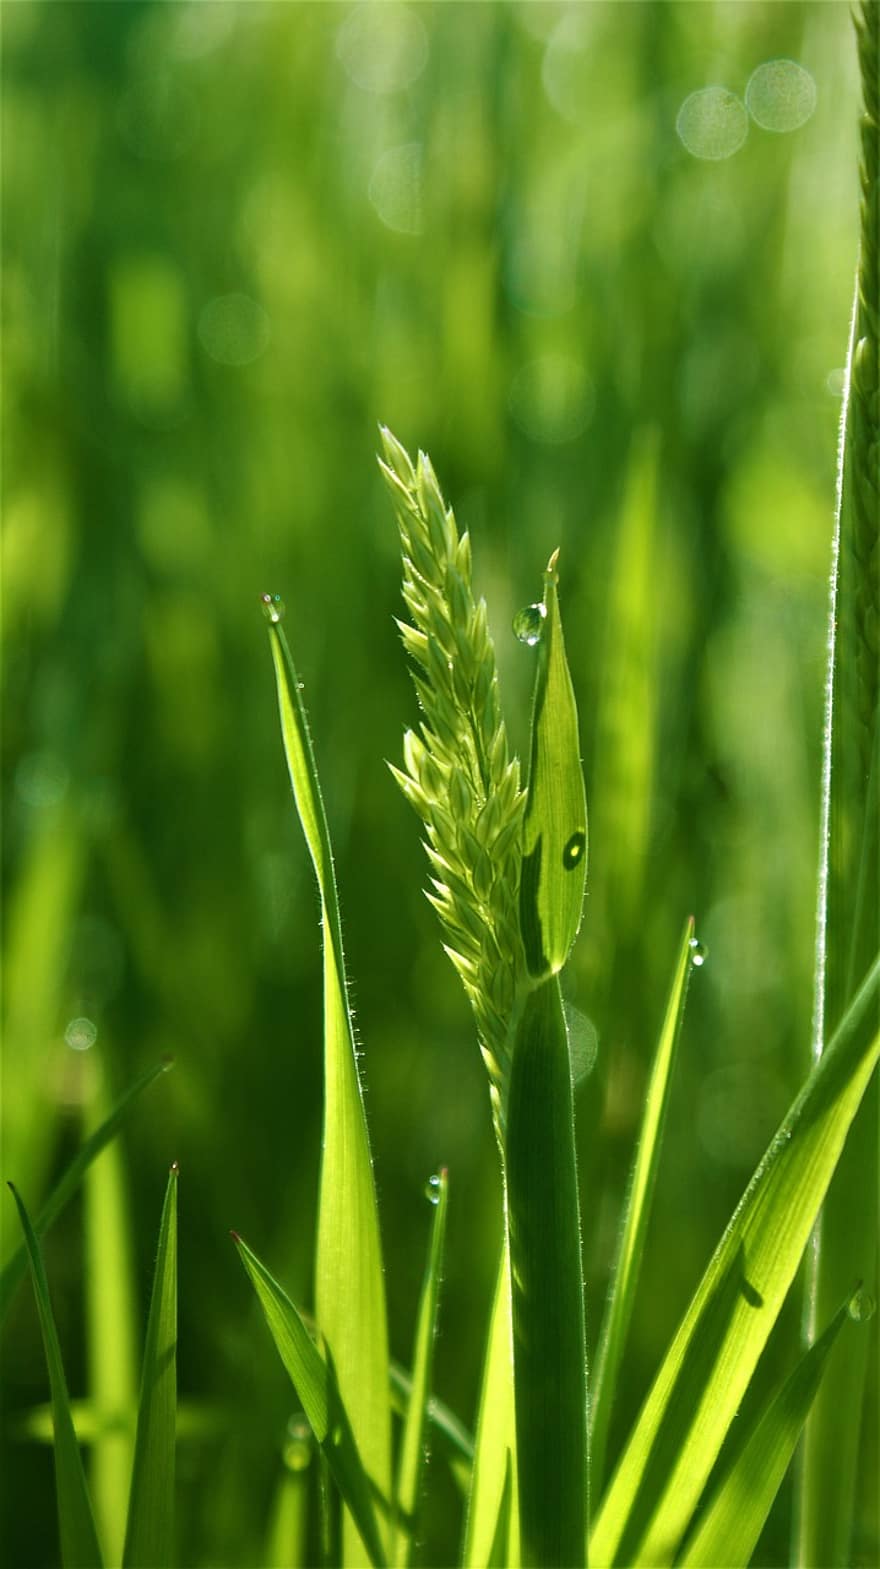 Grasses, Plant, Dew, Wet, Dewdrops, Leaves, Blades Of Grass, Meadow, Nature, Bokeh